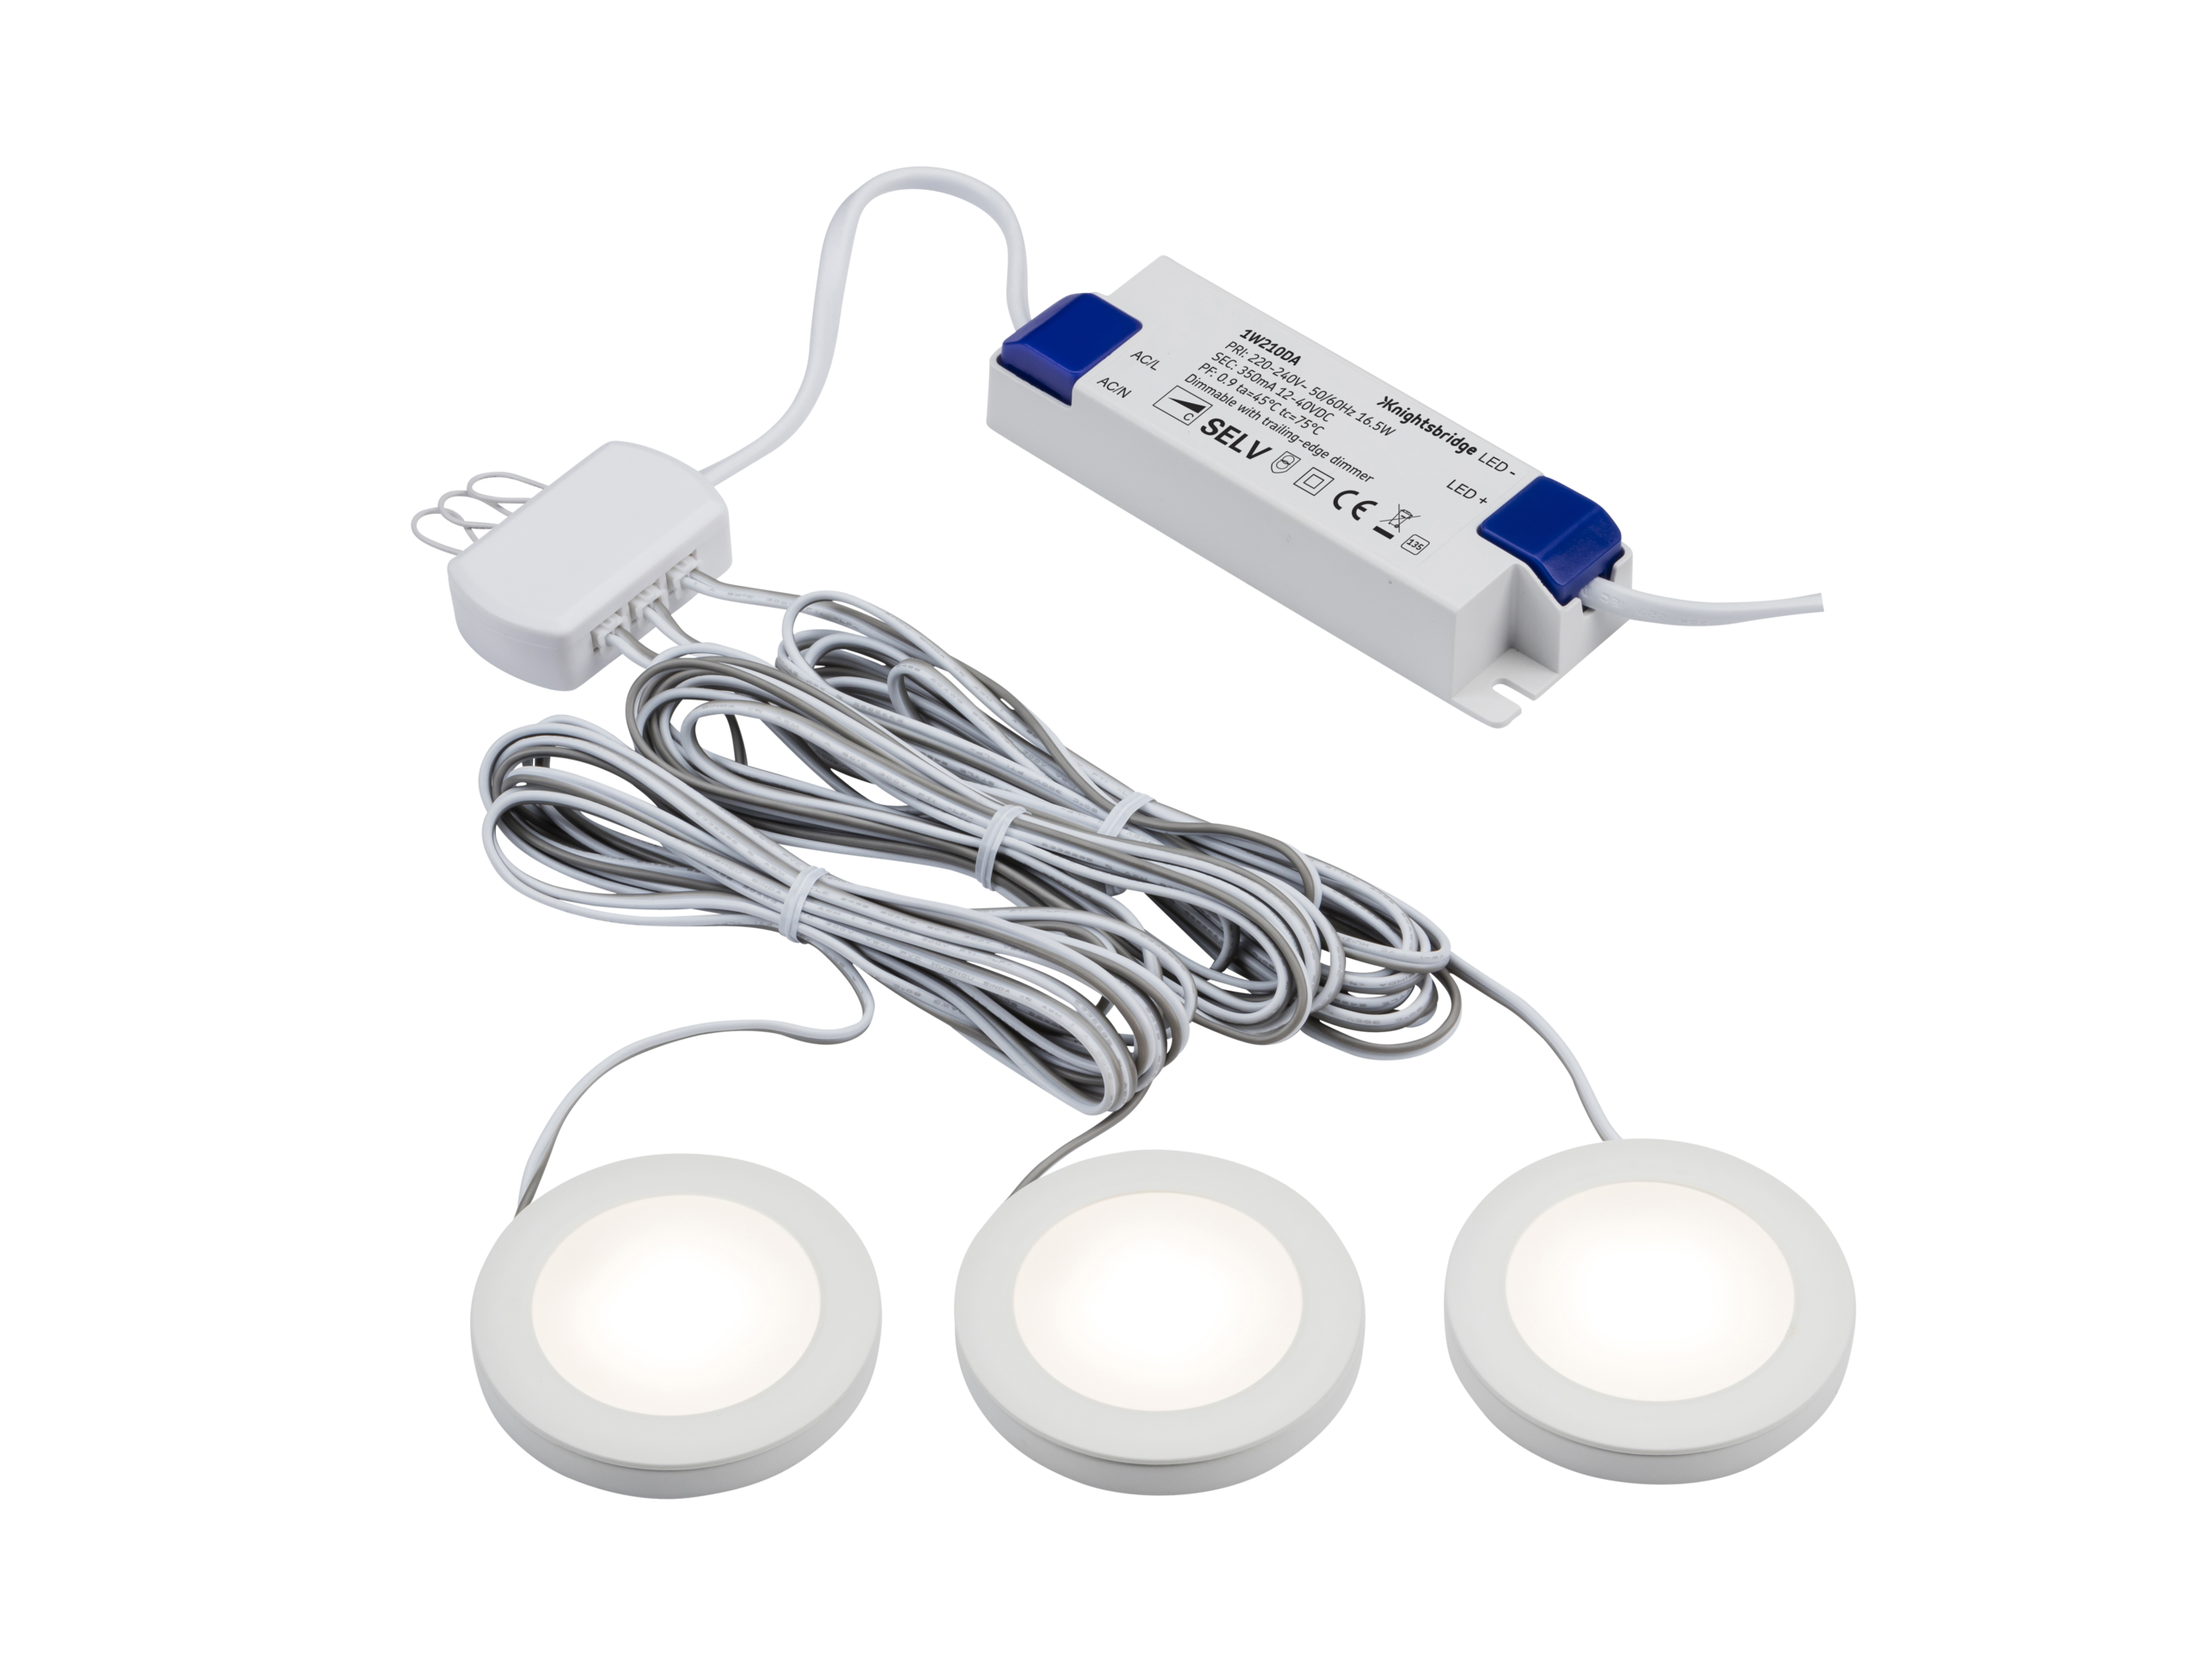 ML Accessories-UNDKIT3WWW 230V IP20 2.5W LED Dimmable Under Cabinet Lights in White - Pack of 3  - 3000K